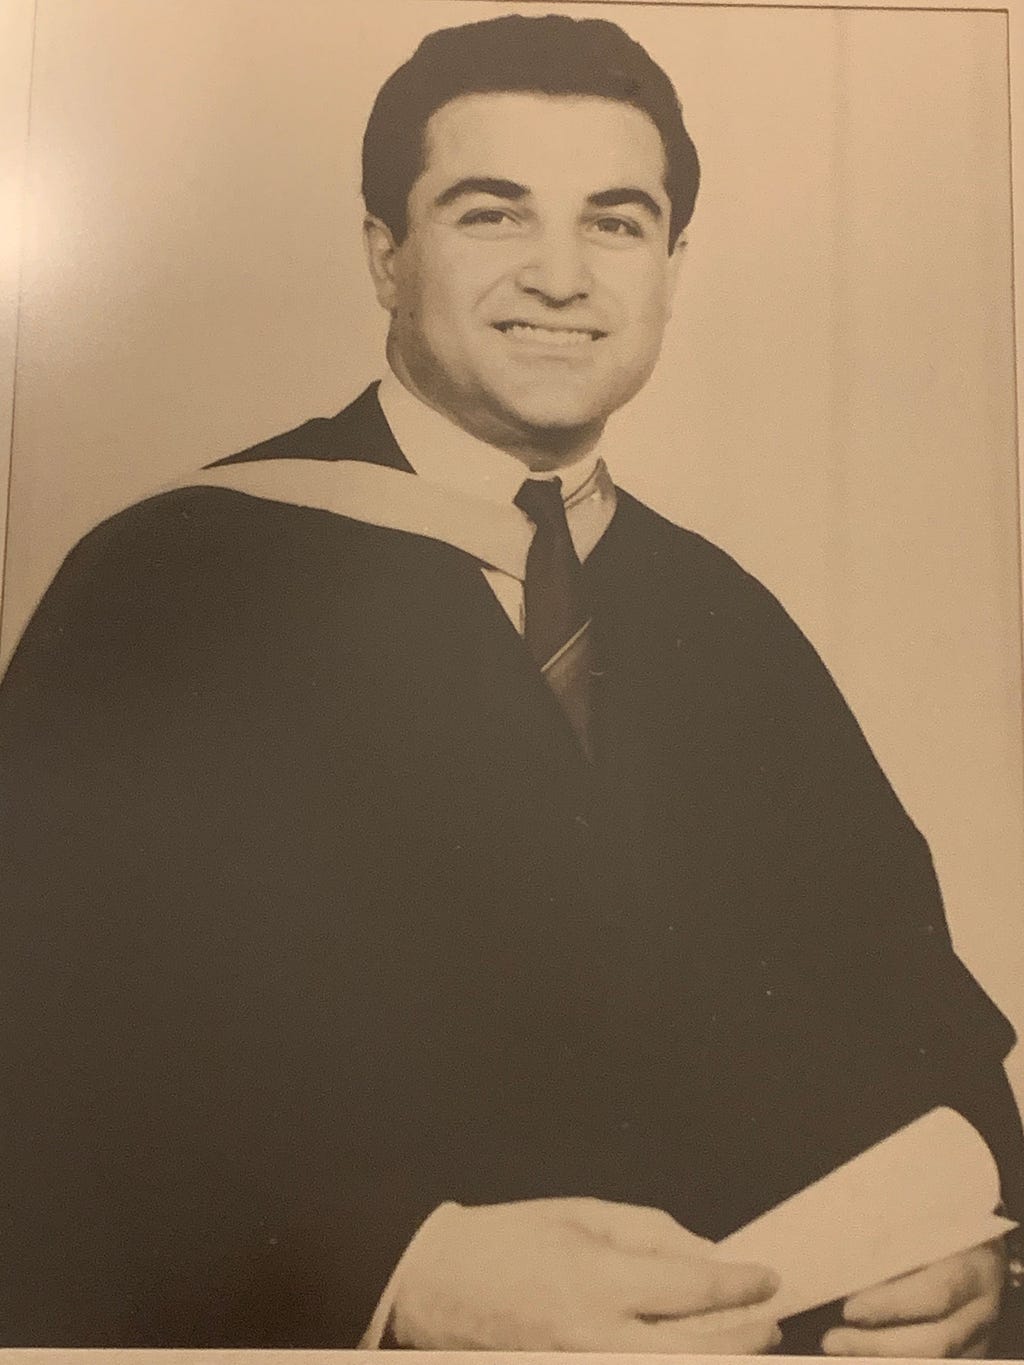 Image of Dr Pierides in graduation gown